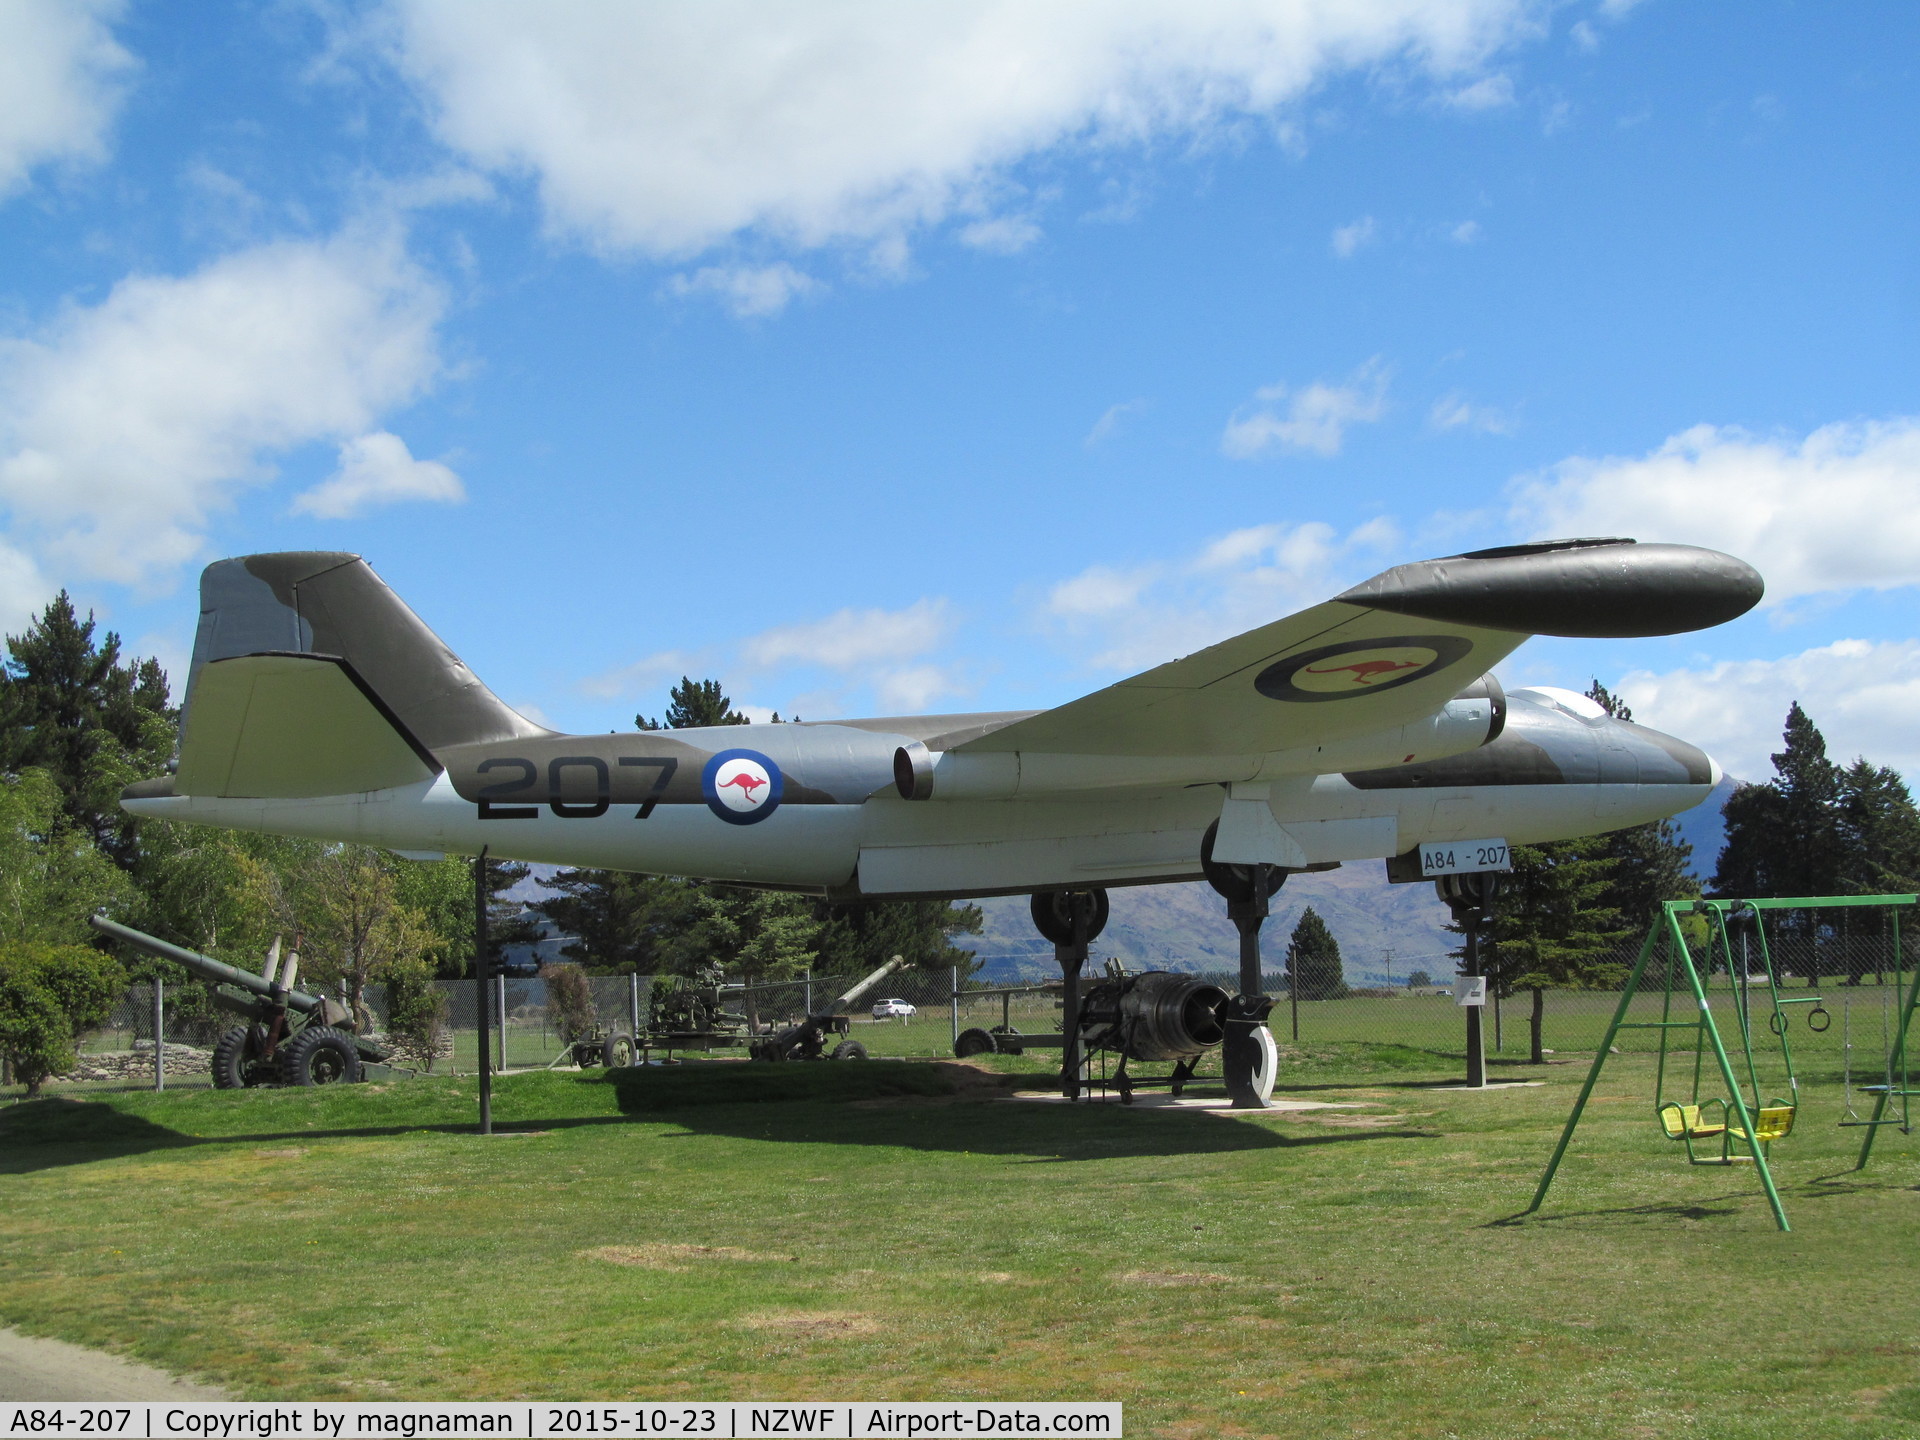 A84-207, 1954 English Electric Canberra B.20 C/N 7, At T&T museum